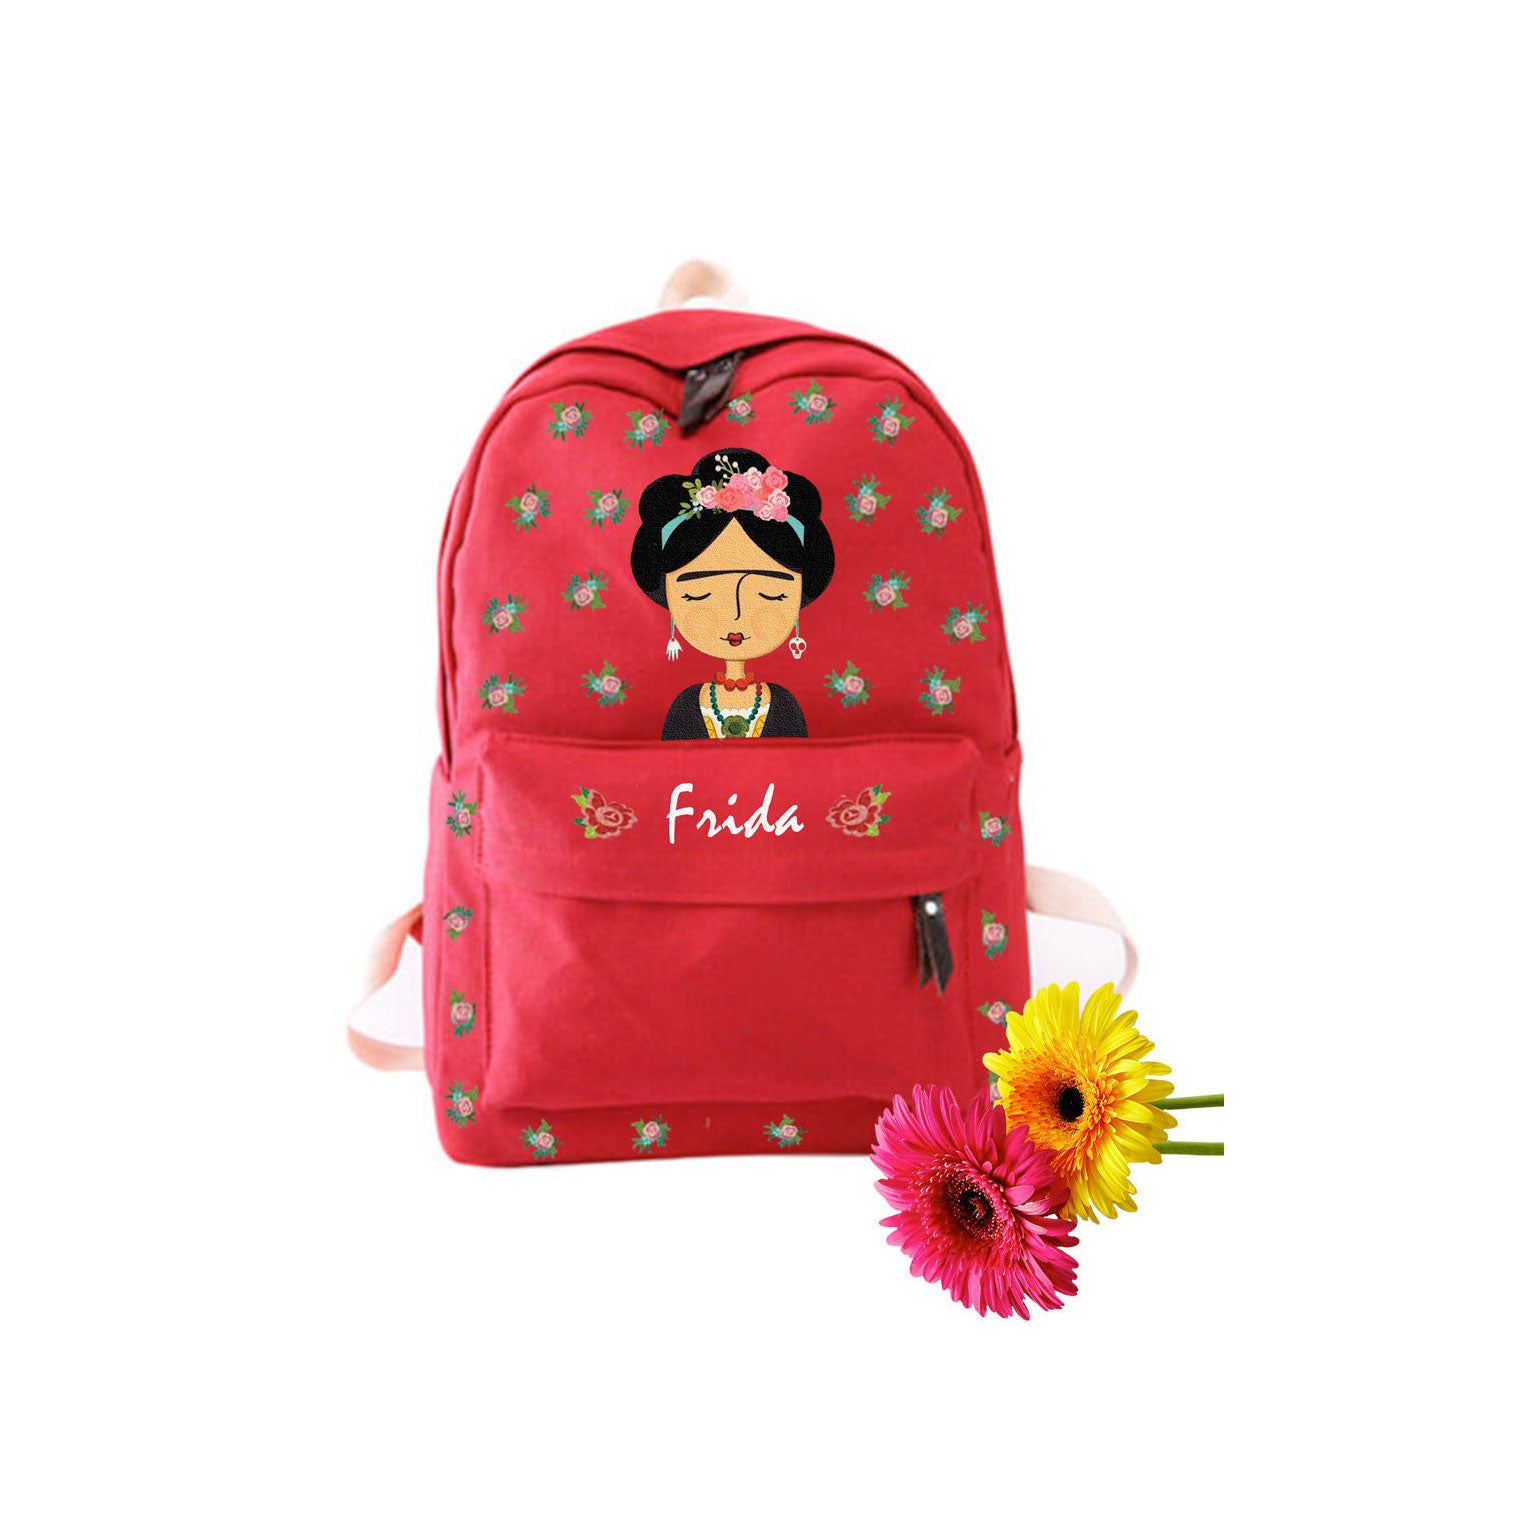 Frida bags. Frida kahlo hand painted red or pink personalized backpack. Little Frida portrait and flowers by Fridamanics jewelry and accesories